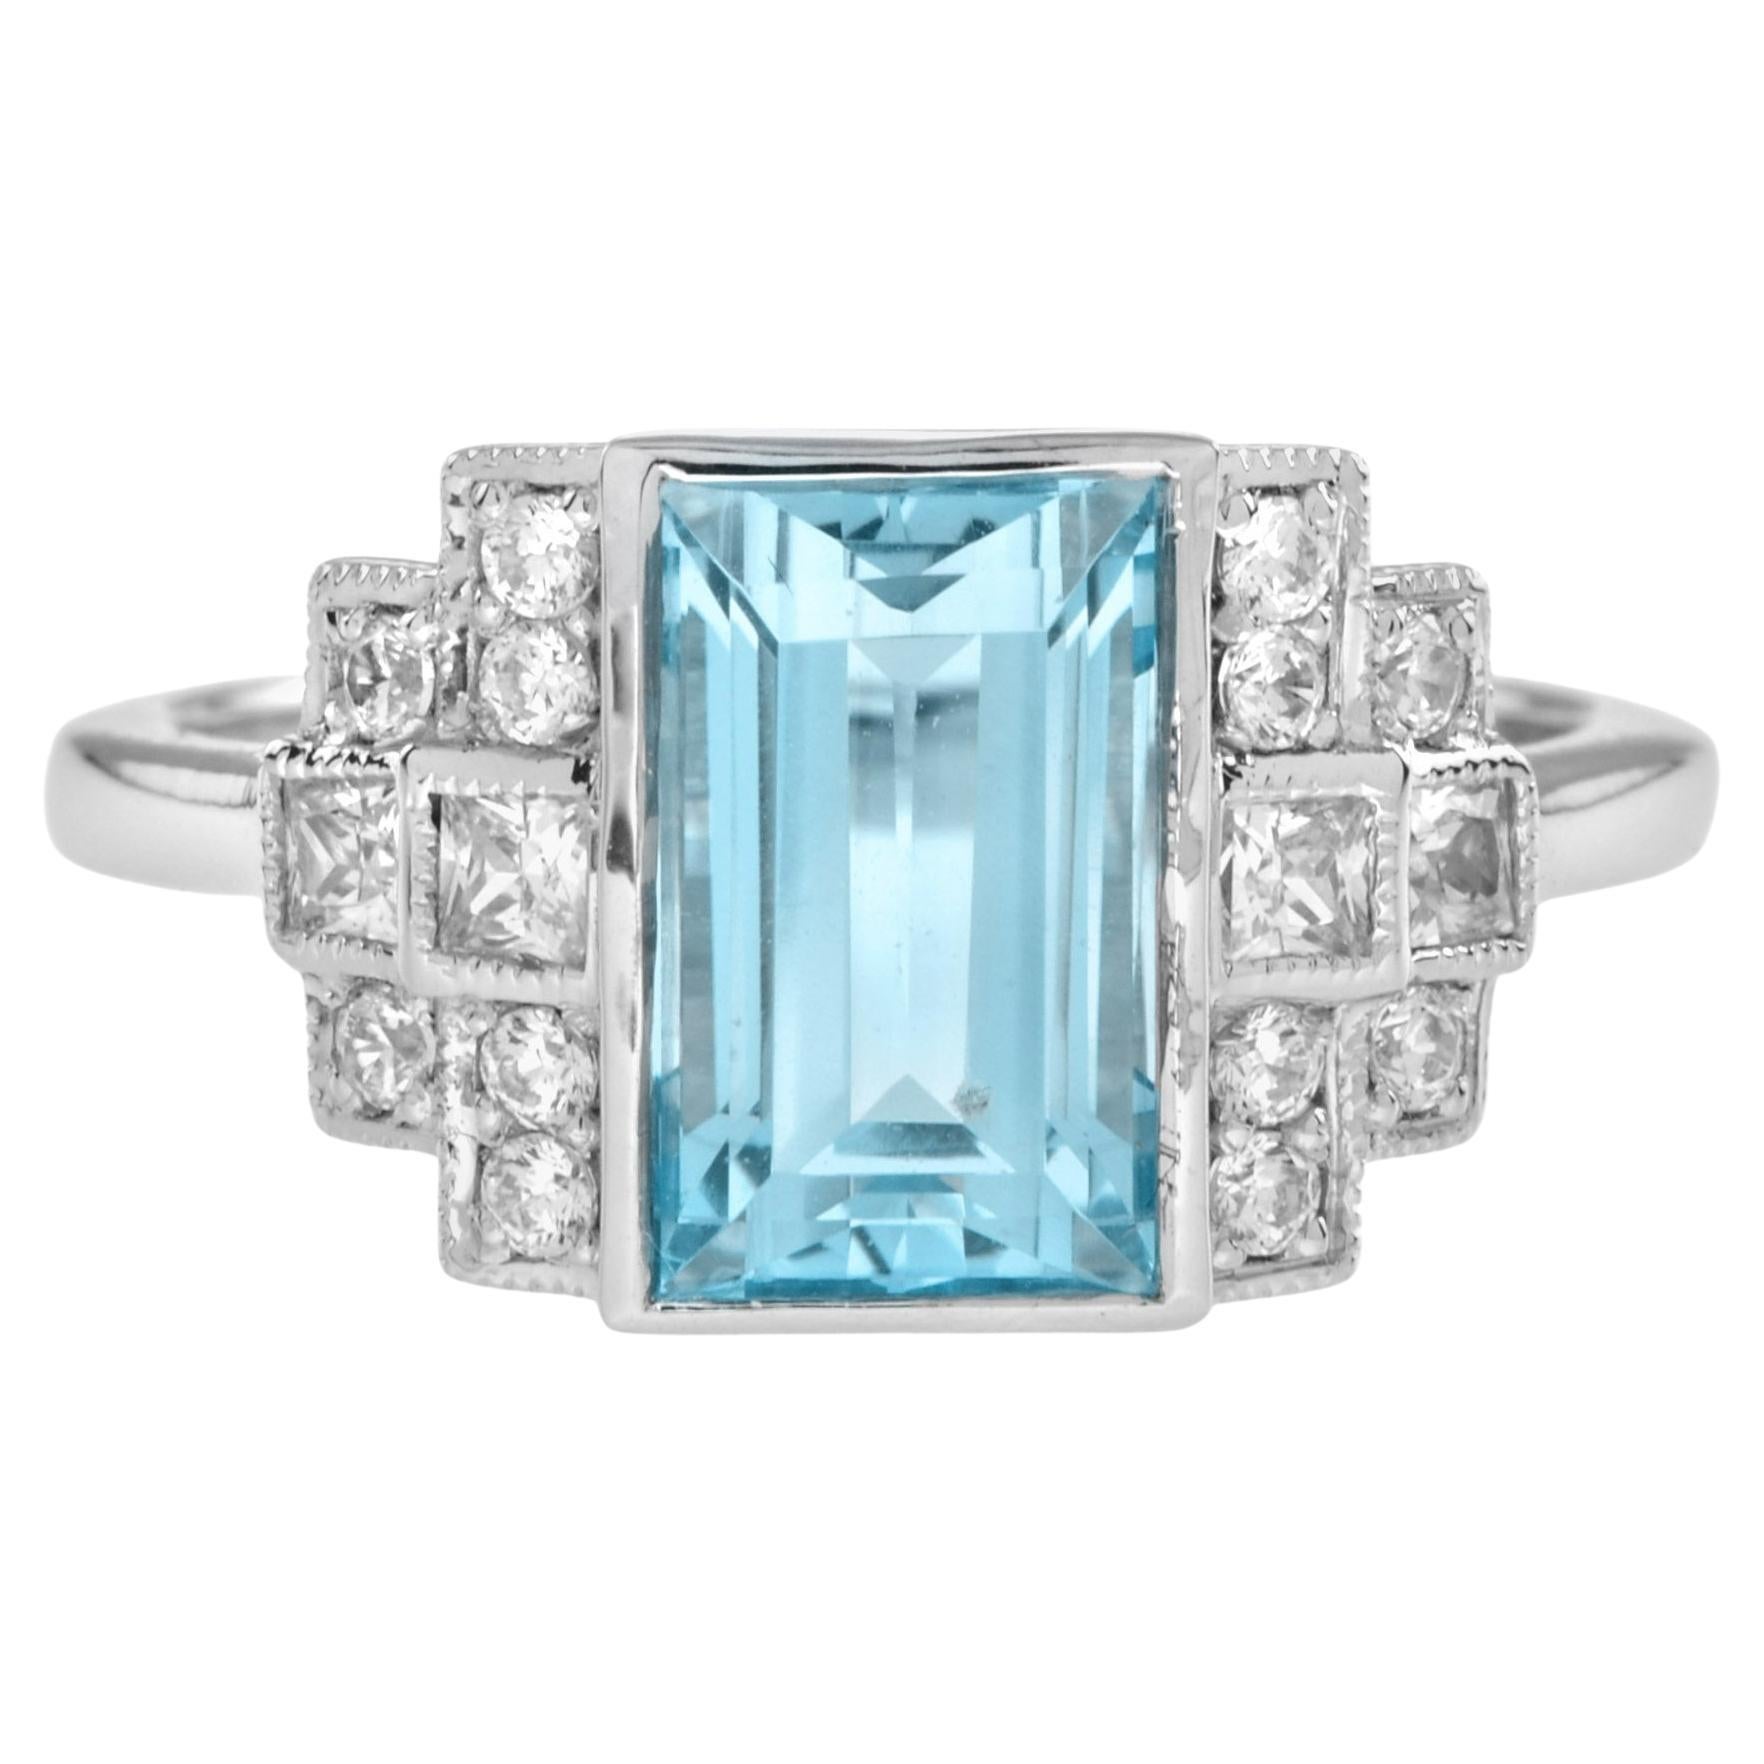 3.50 Ct. Aquamarine and Diamond Art Deco Style Cocktail Ring in 18K White Gold For Sale